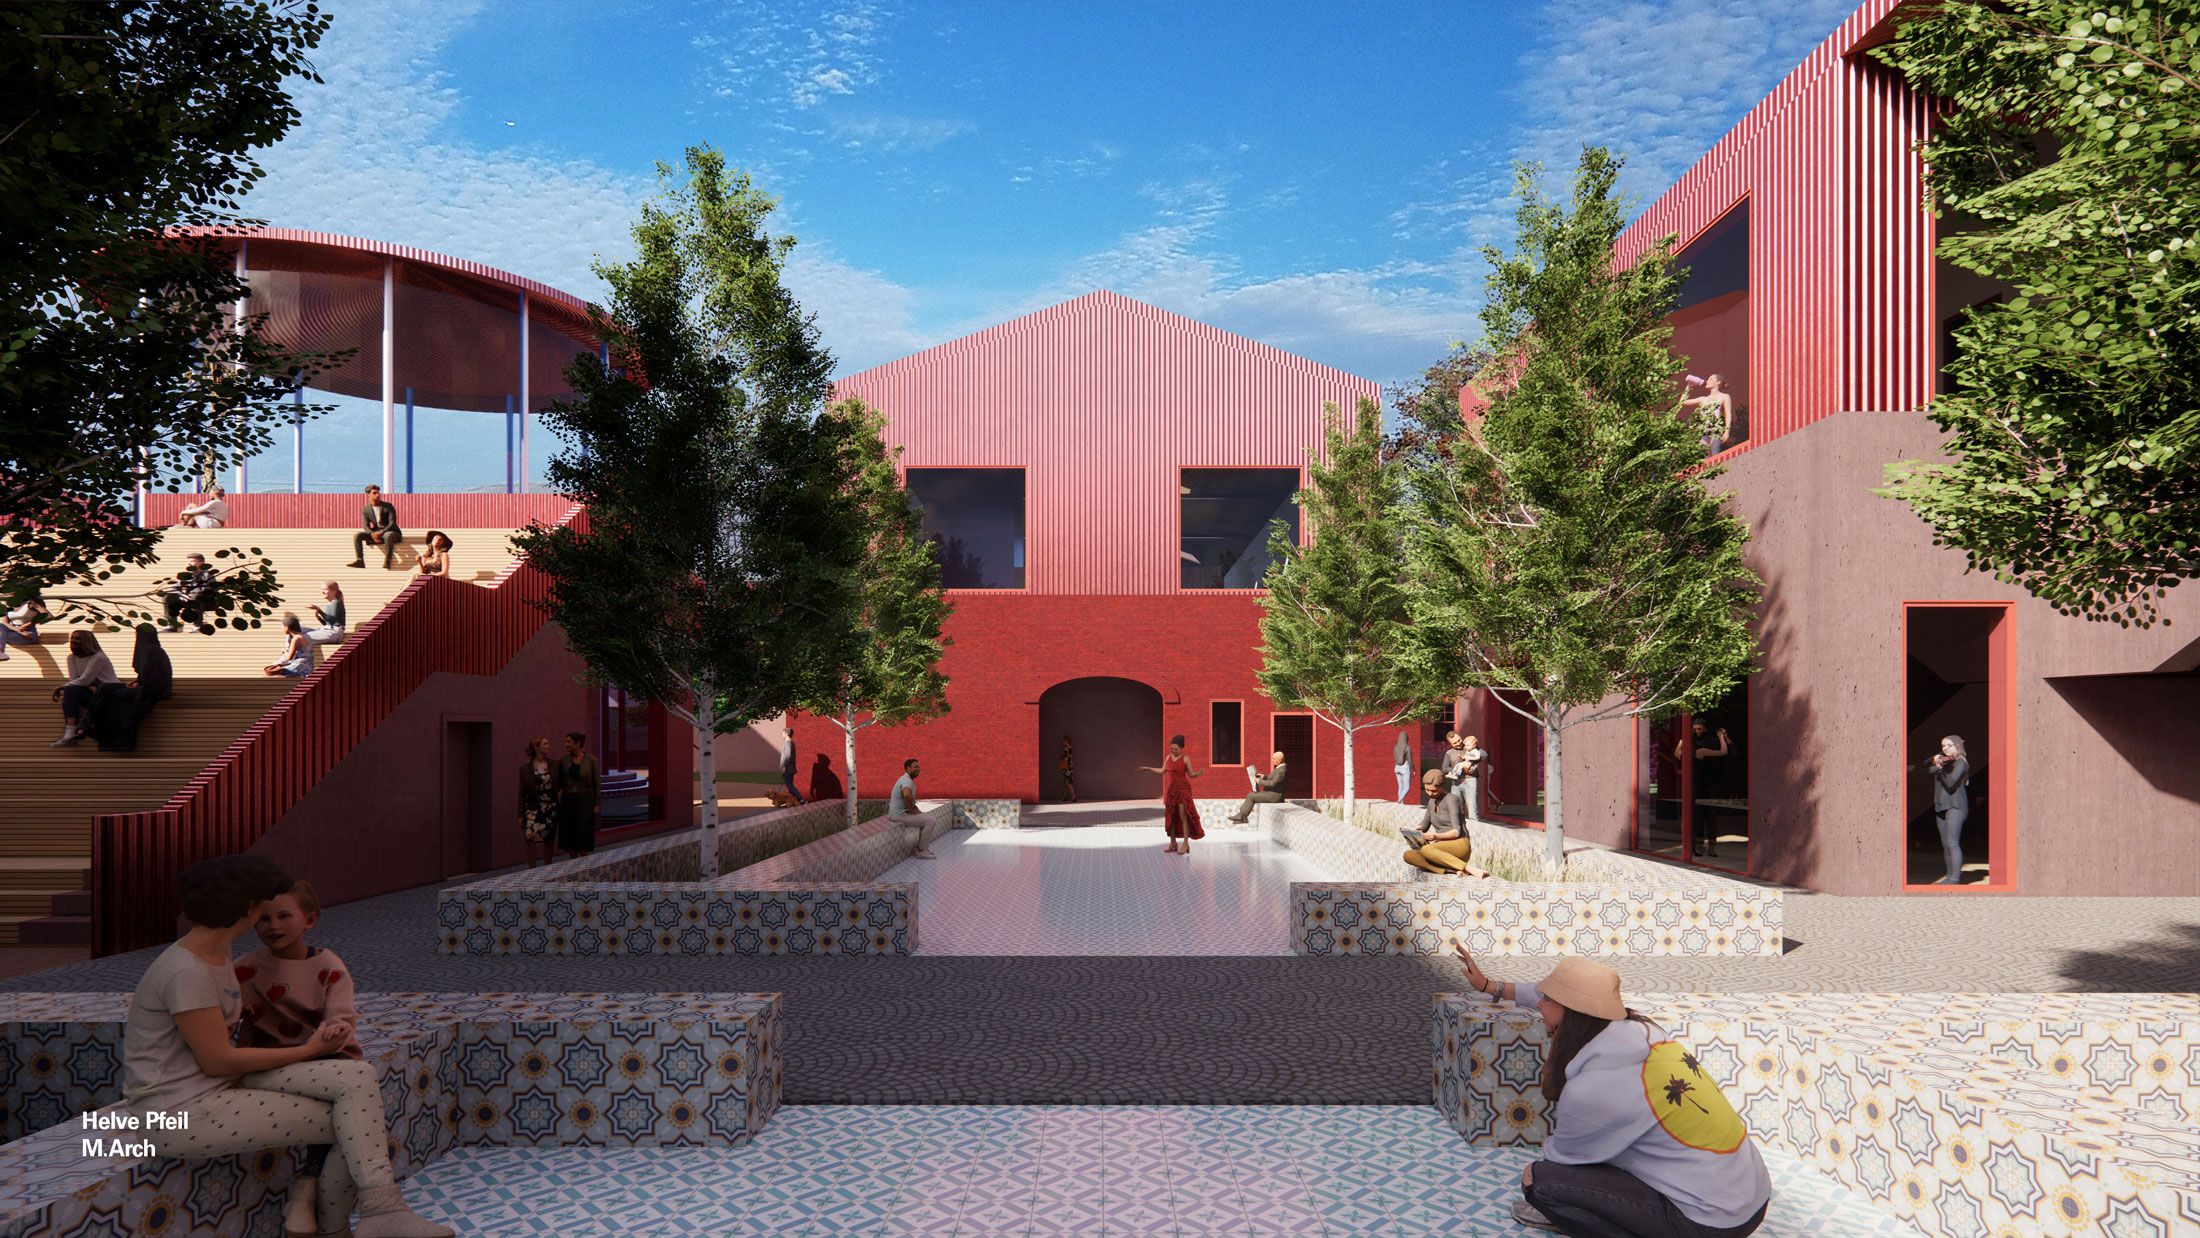 Adaptability - Adaptable Community Center: Architecture in a Rural Context - Entry Perspective Rendering  